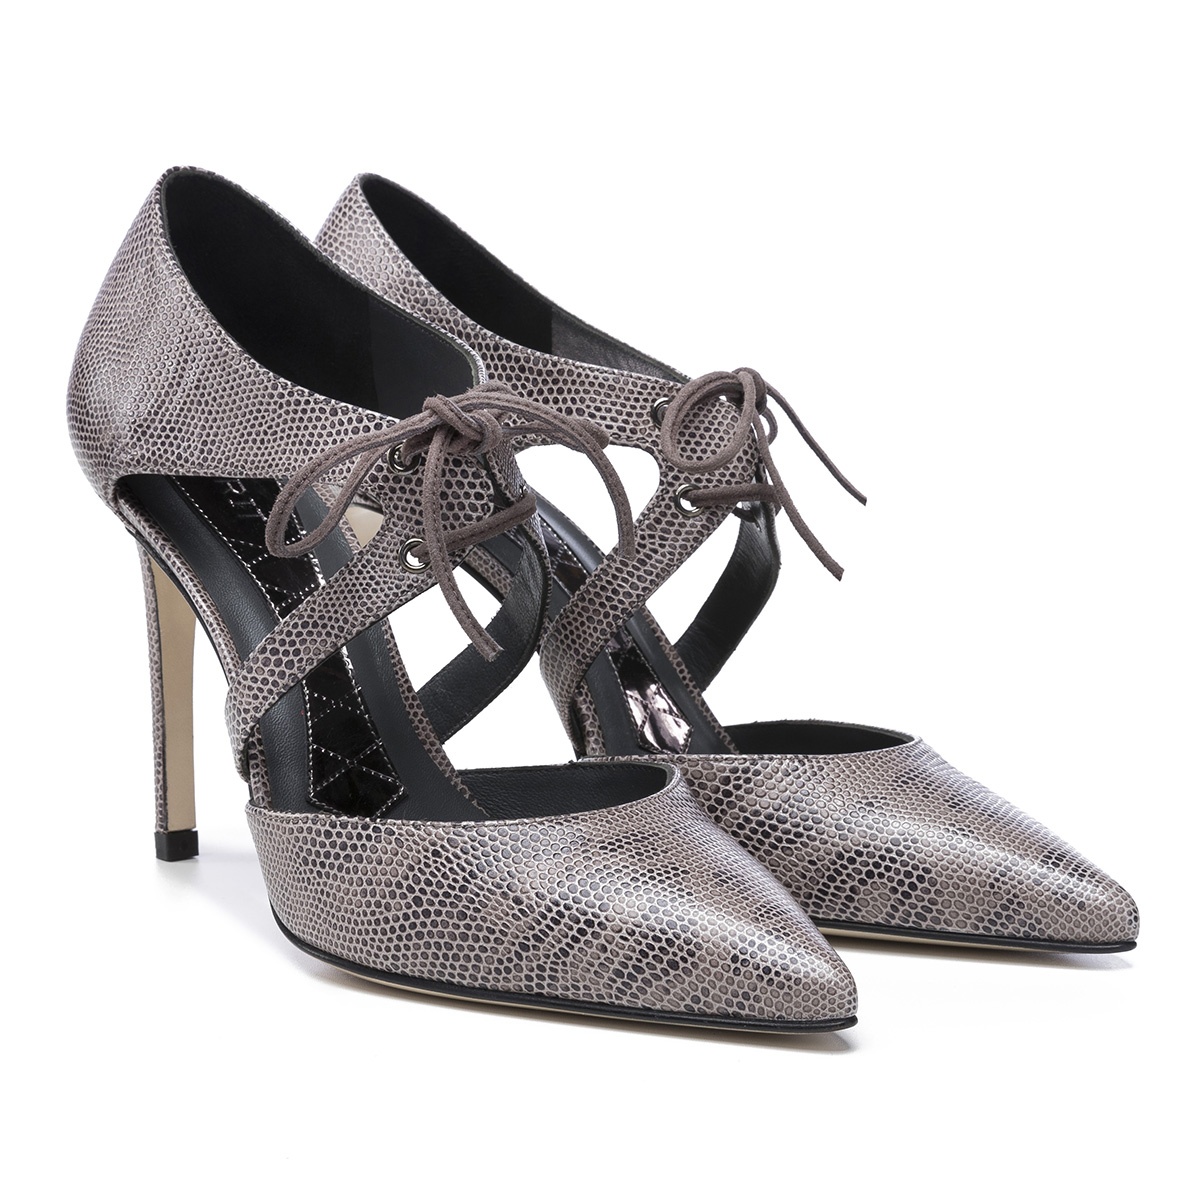 Magrit 'Marcela' taupe reptile lace-up pumps